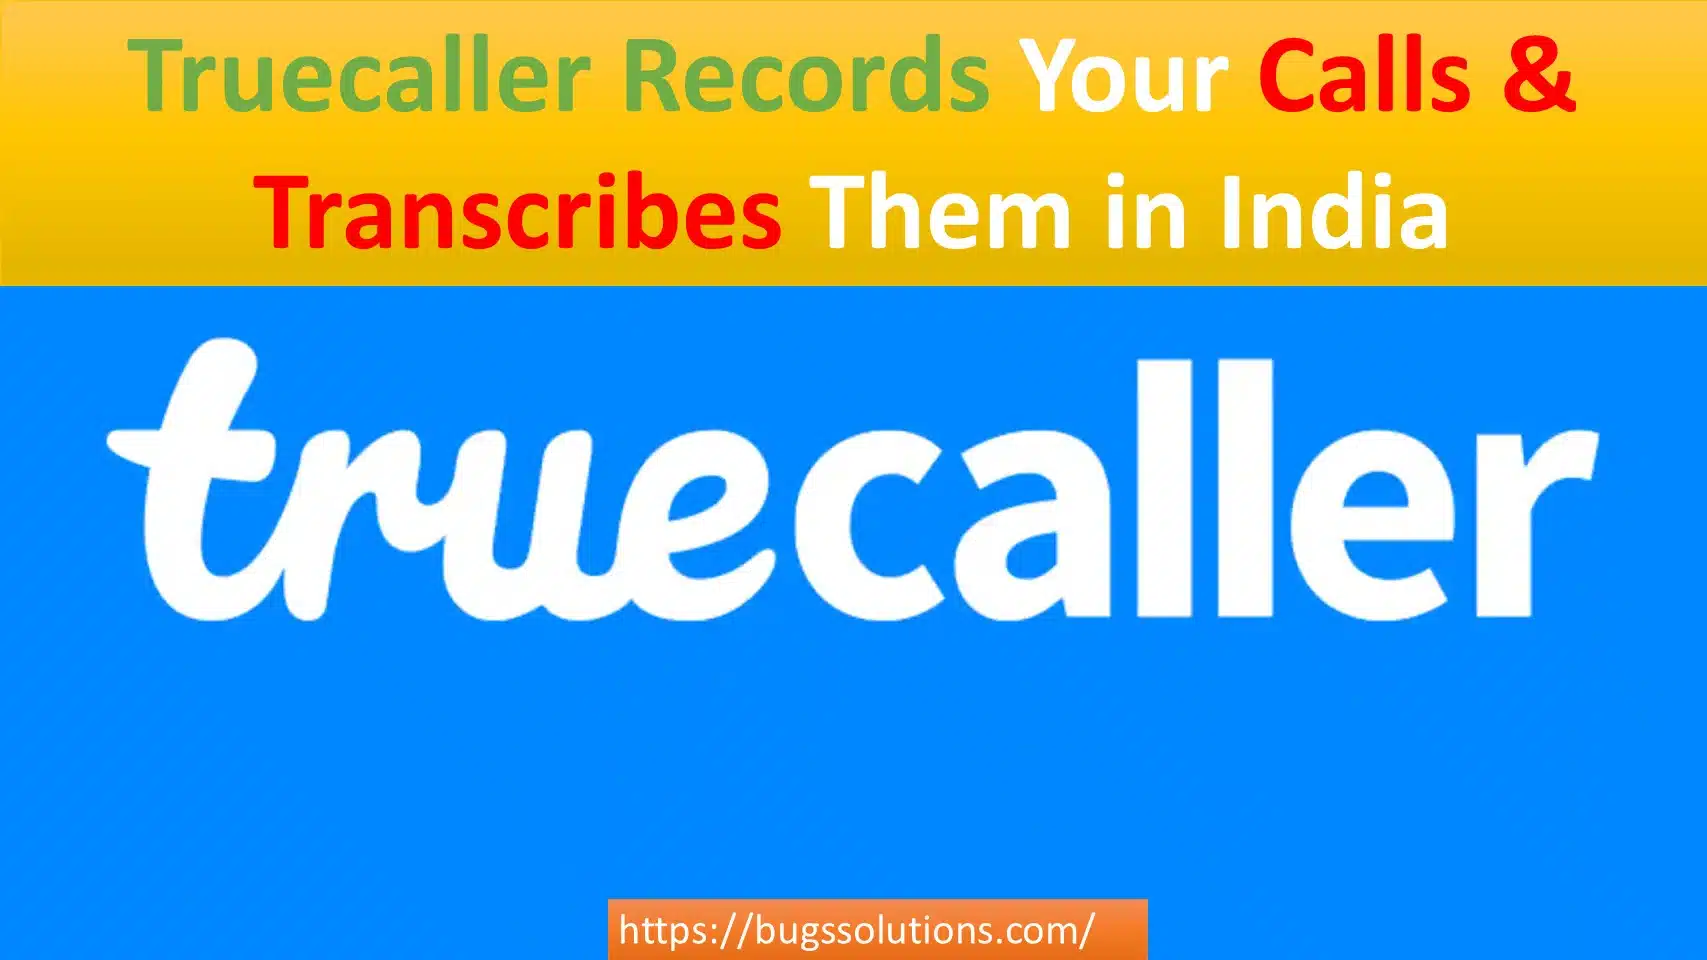 Truecaller Records Your Calls & Transcribes Them in India: Here's How it Works and What You Need to Know